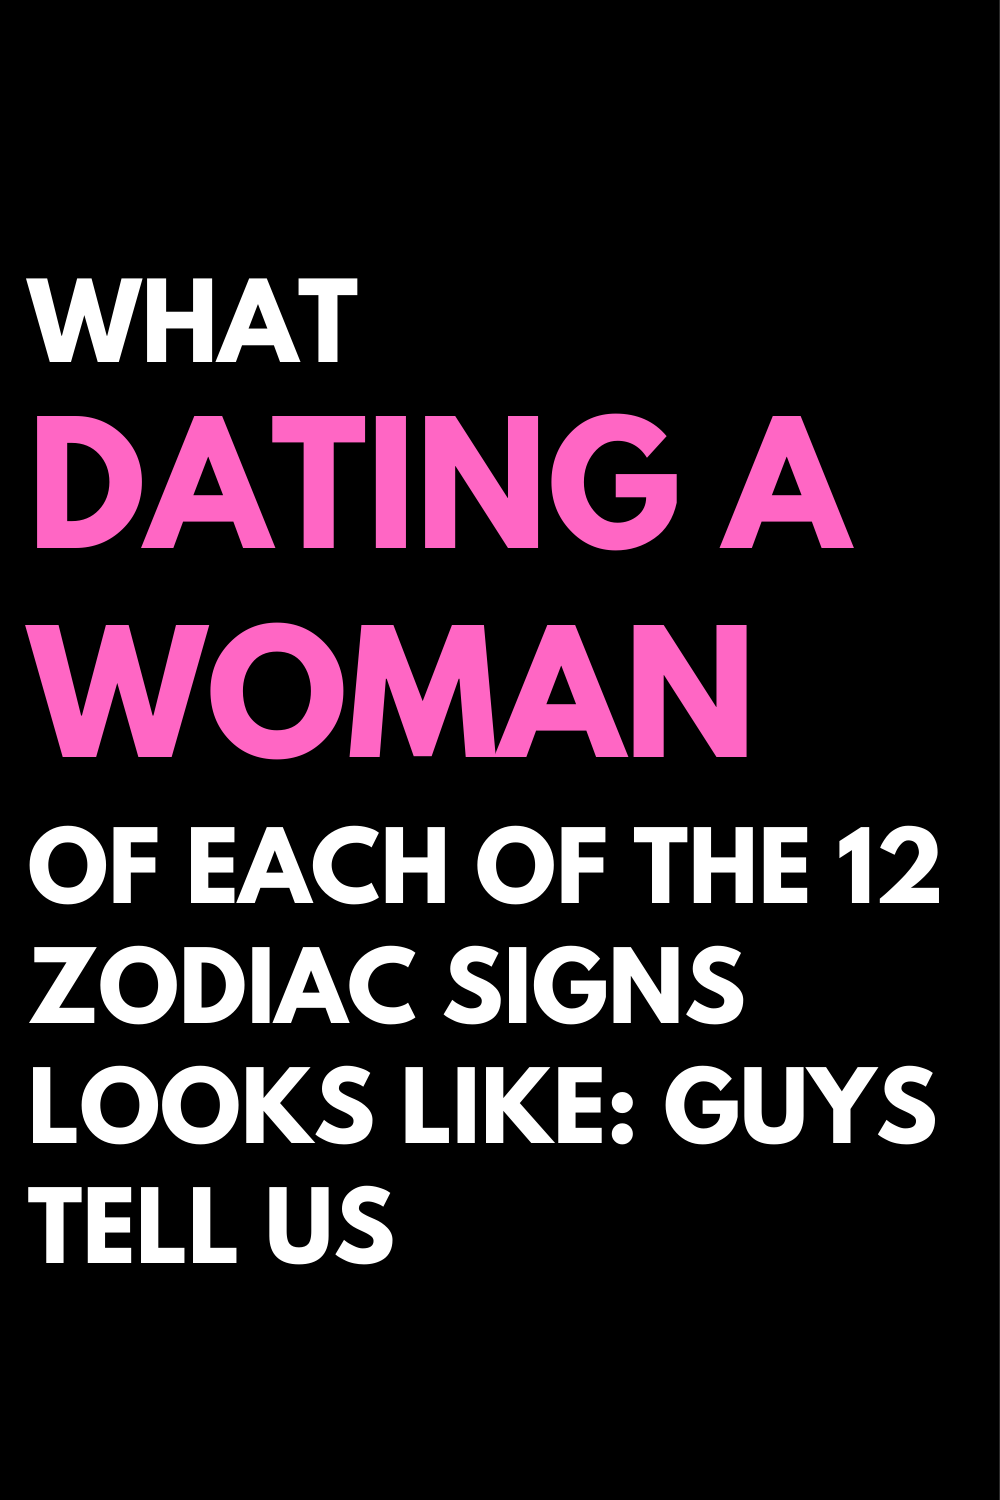 What Dating A Woman Of Each Of The 12 Zodiac Signs Looks Like: Guys Tell Us